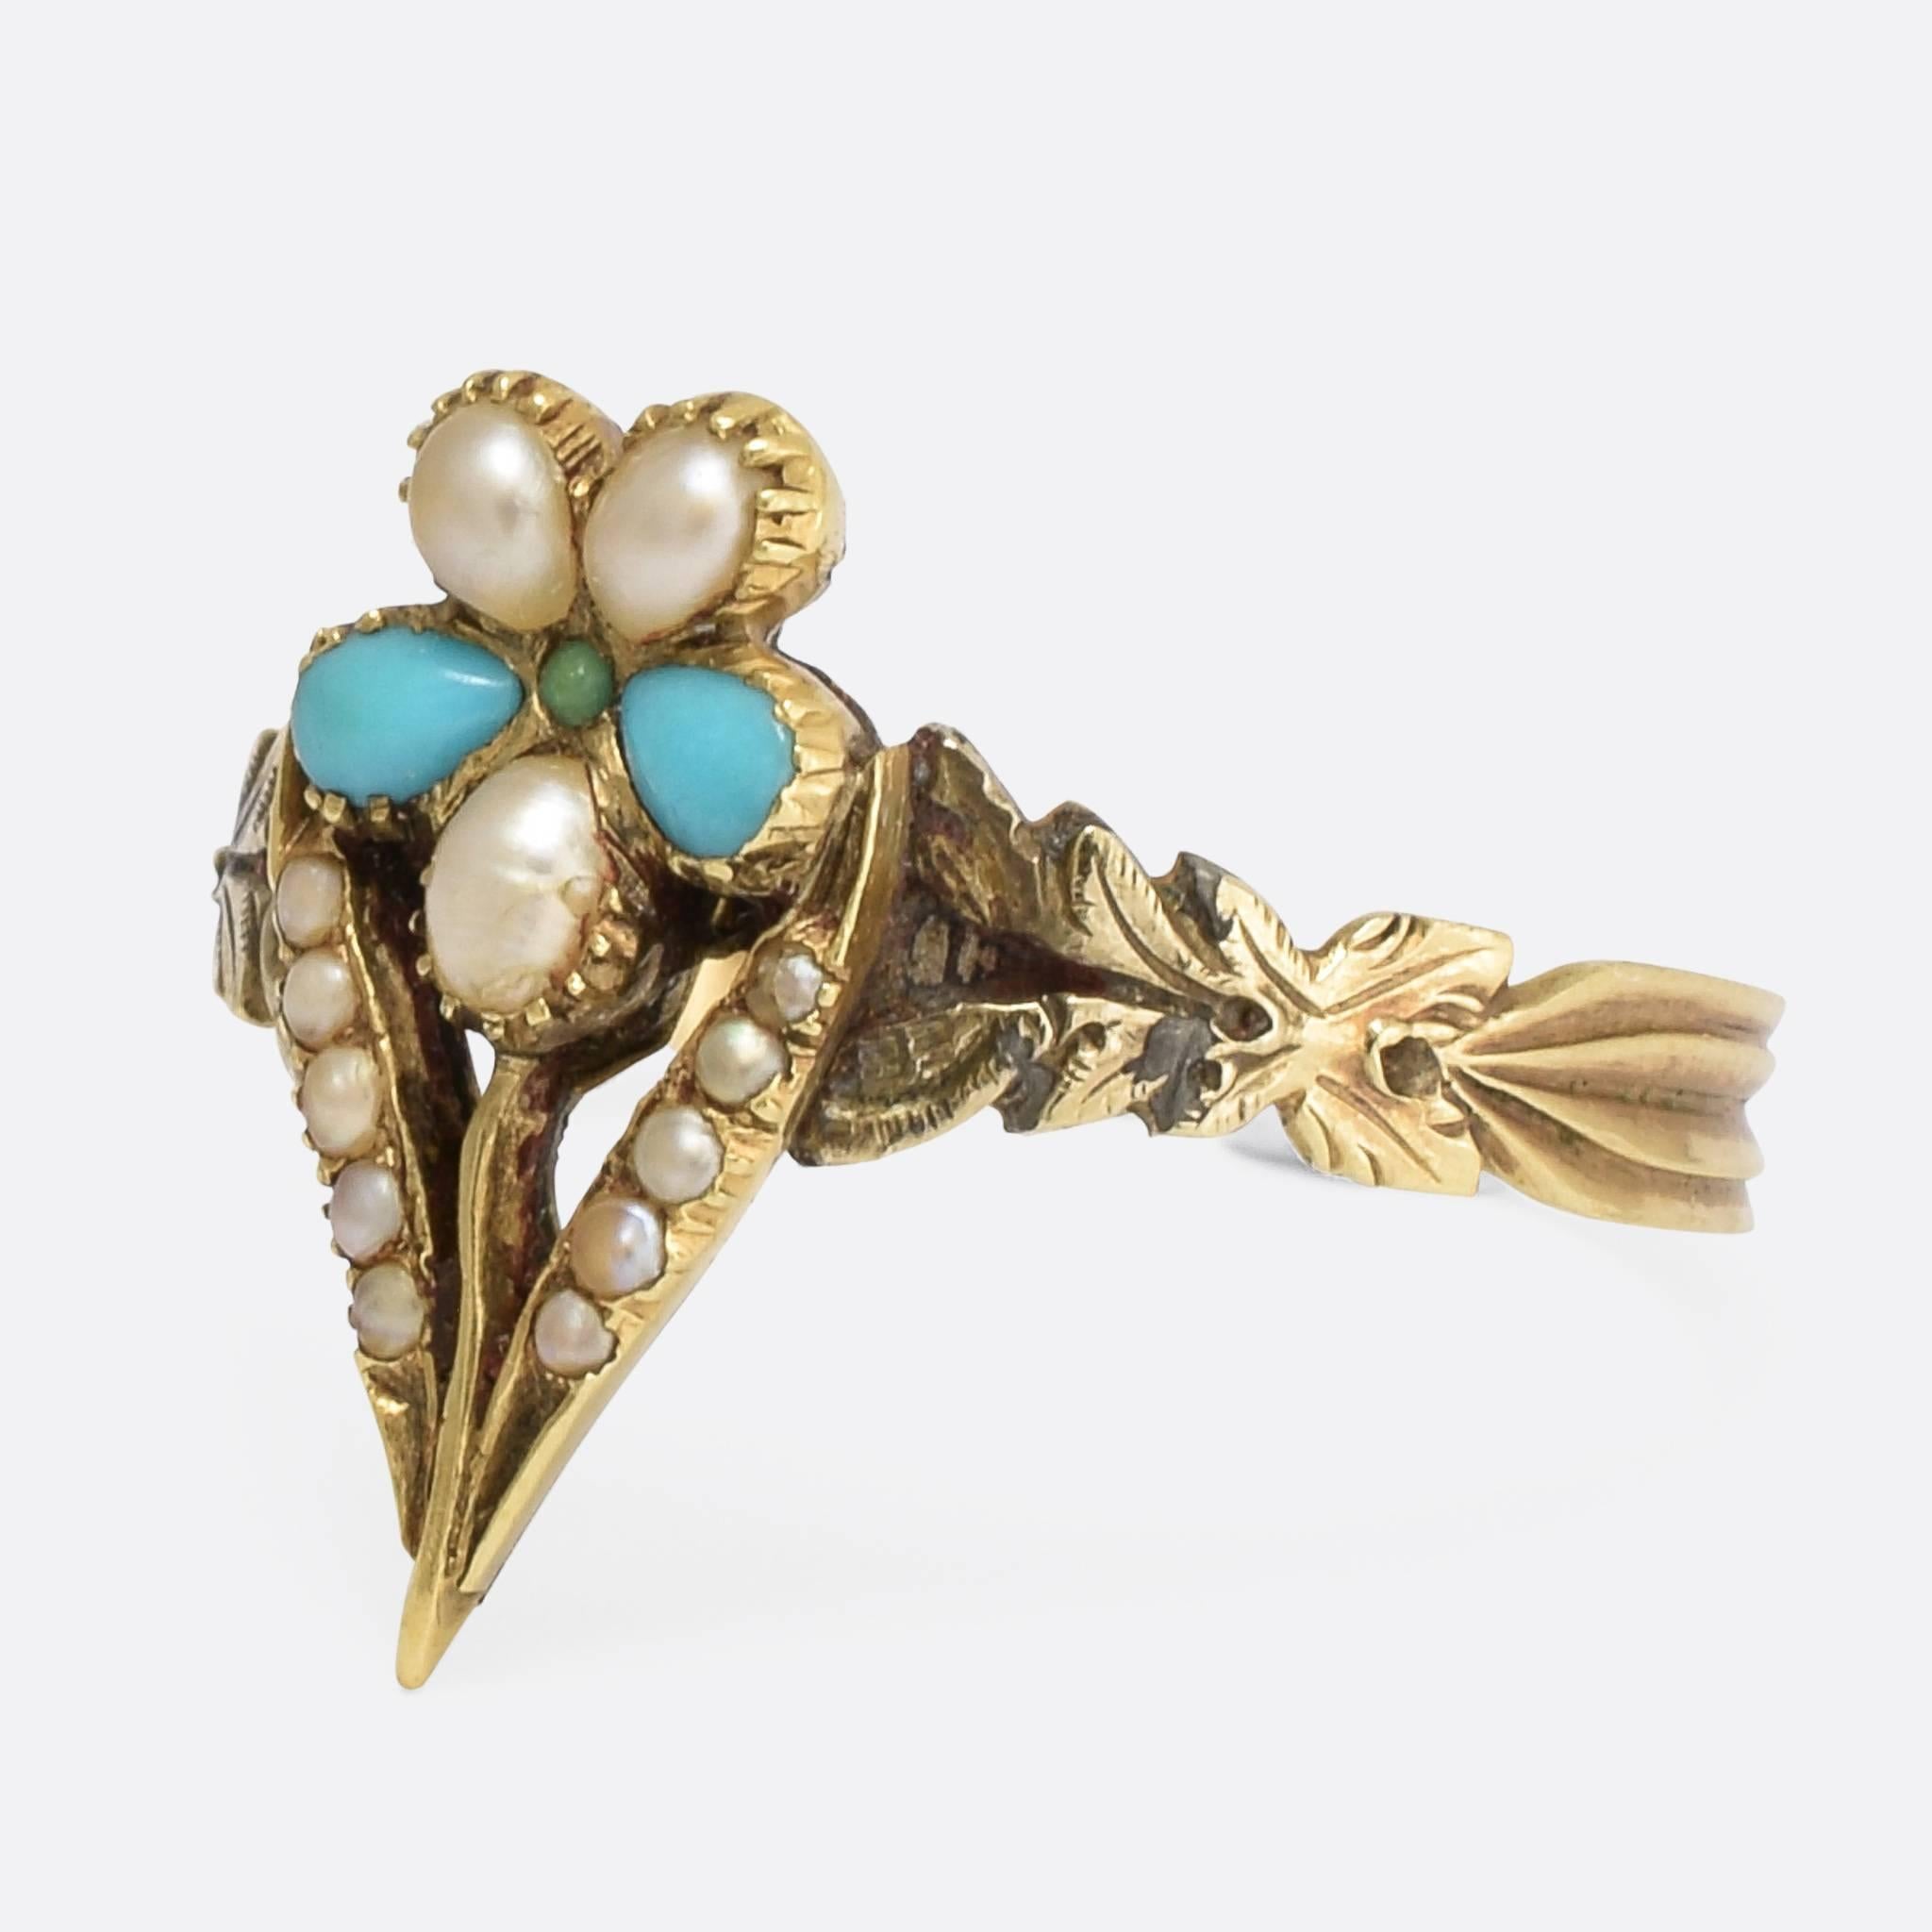 This beautiful Pansy flower ring was made during the Regency Period at the beginning of the 19th Century. The flower is set with three natural pearls, and three turquoise cabochons (including one tiny tiny turquoise in the centre). The leaves are